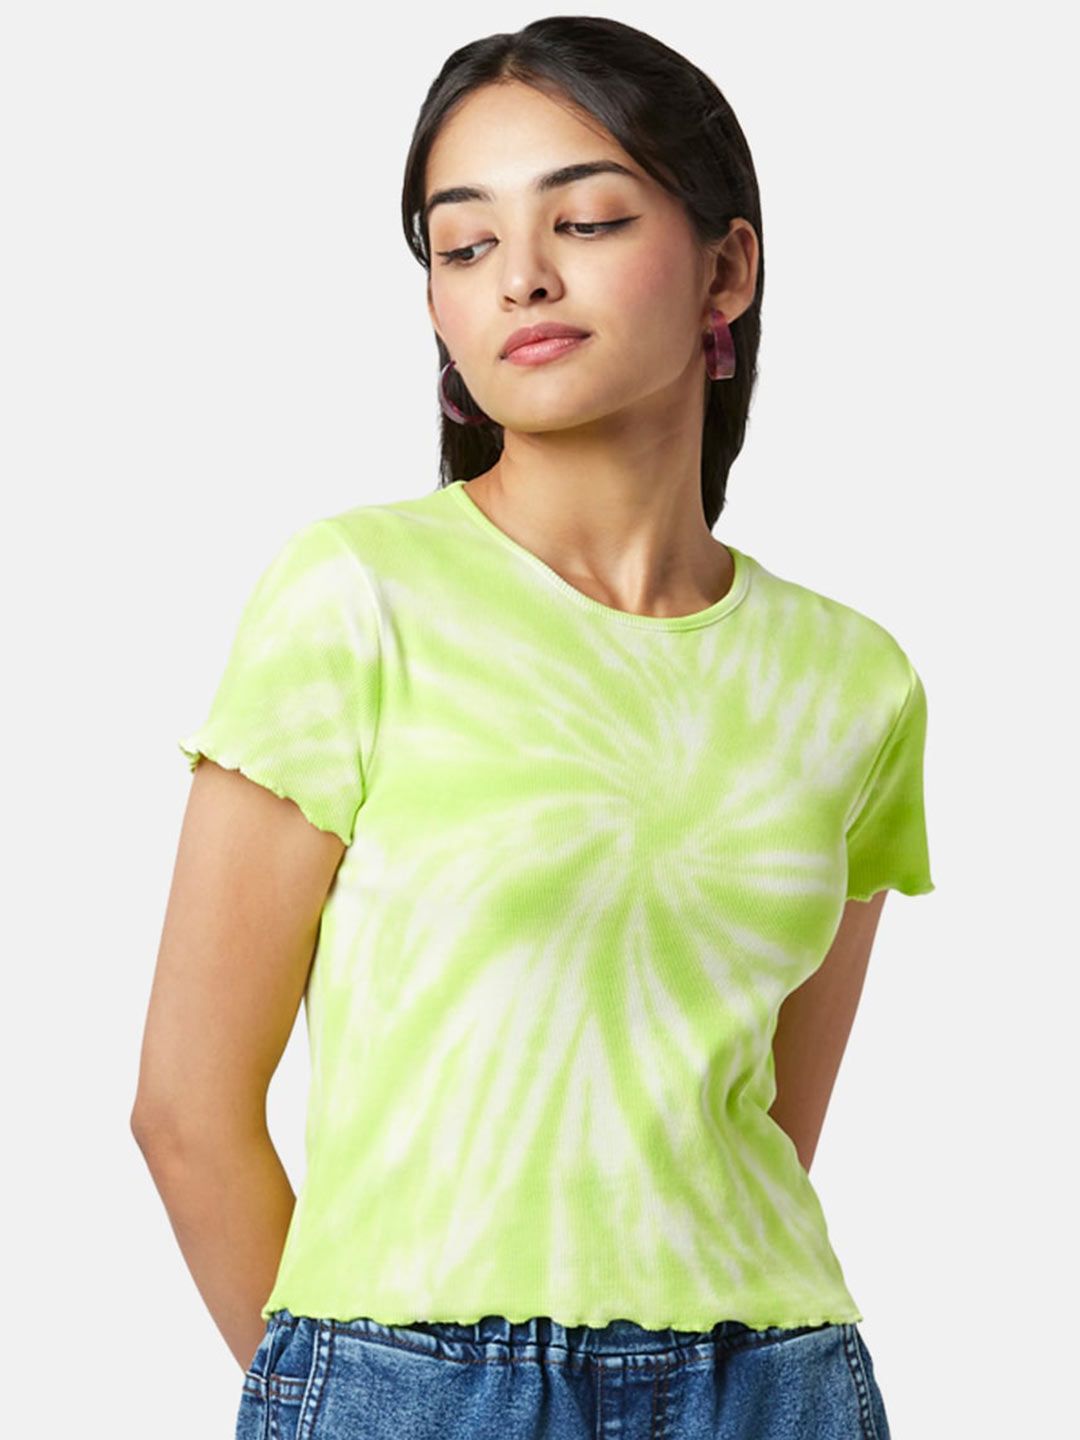 YU by Pantaloons Dyed Tie and Dye Top Price in India